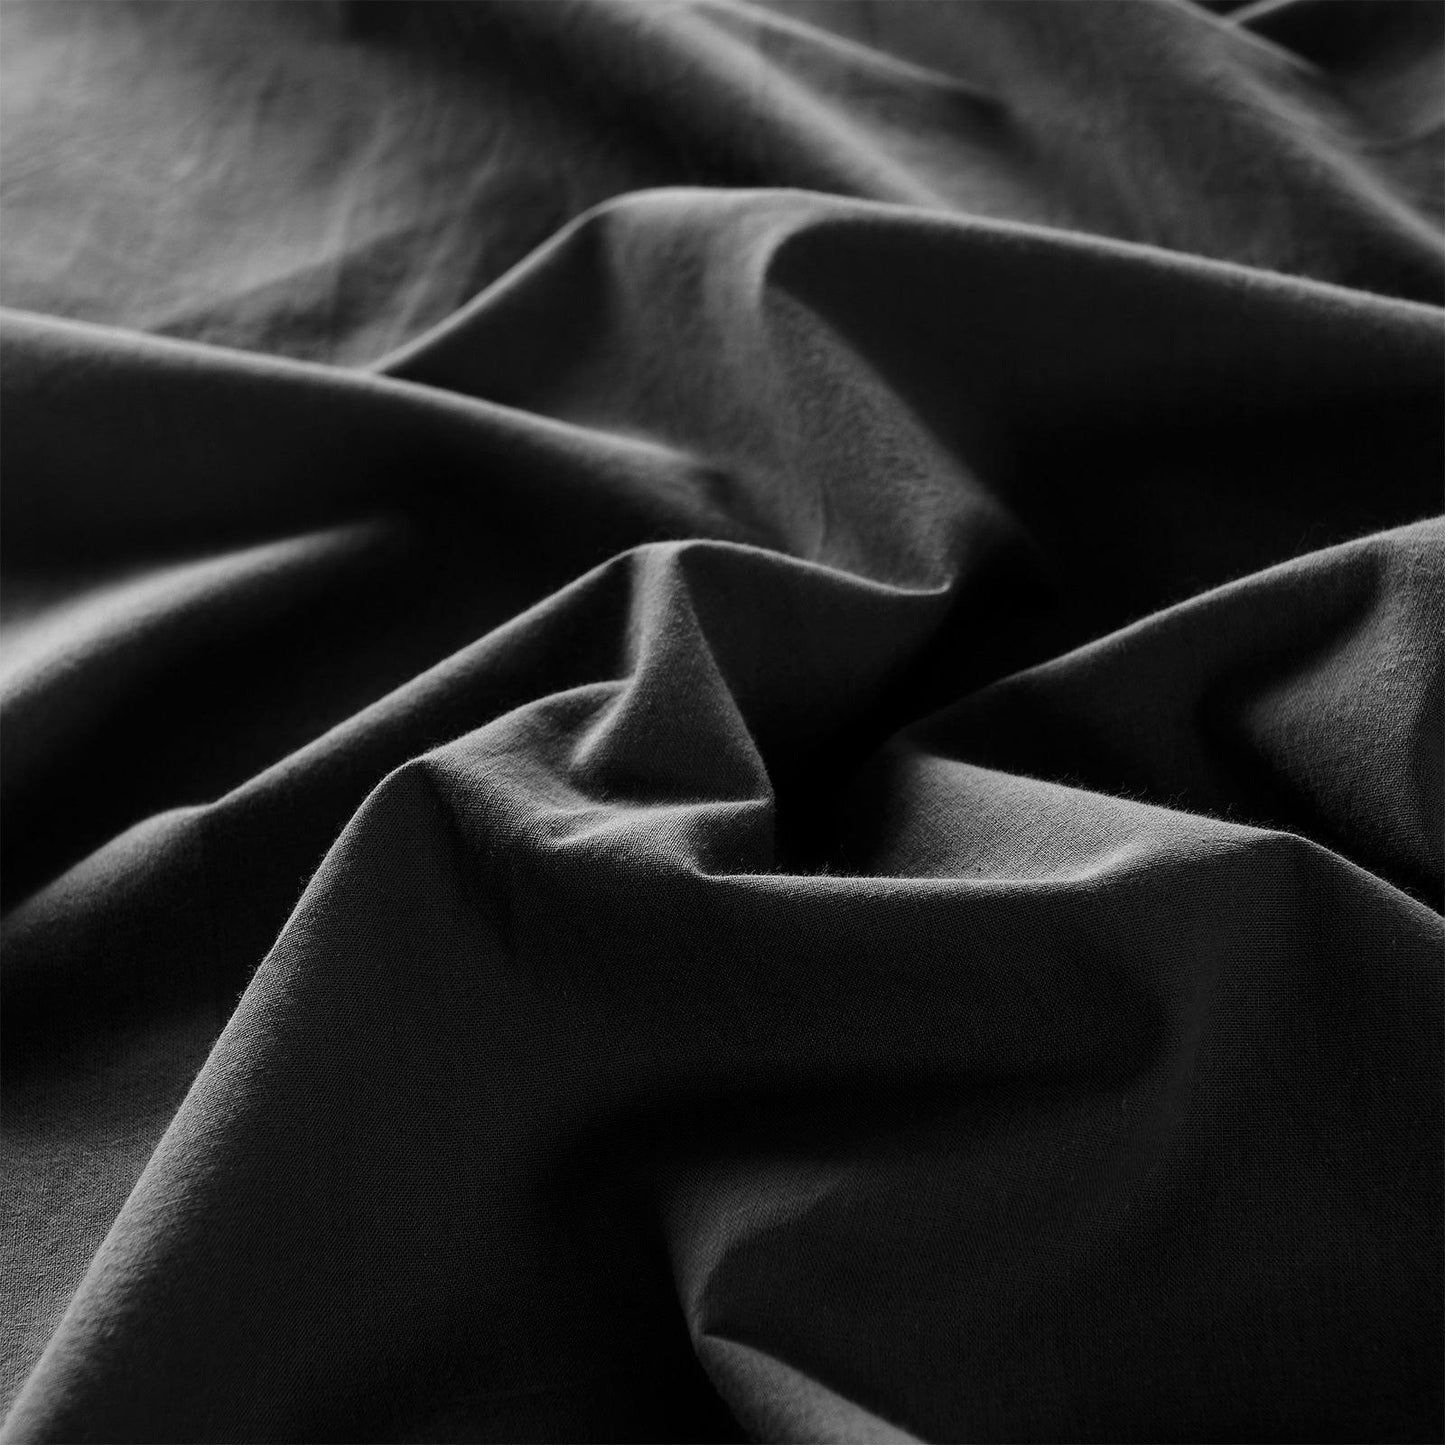 Royal Comfort Vintage Washed 100% Cotton Quilt Cover Set Bedding Ultra Soft - Double - Charcoal